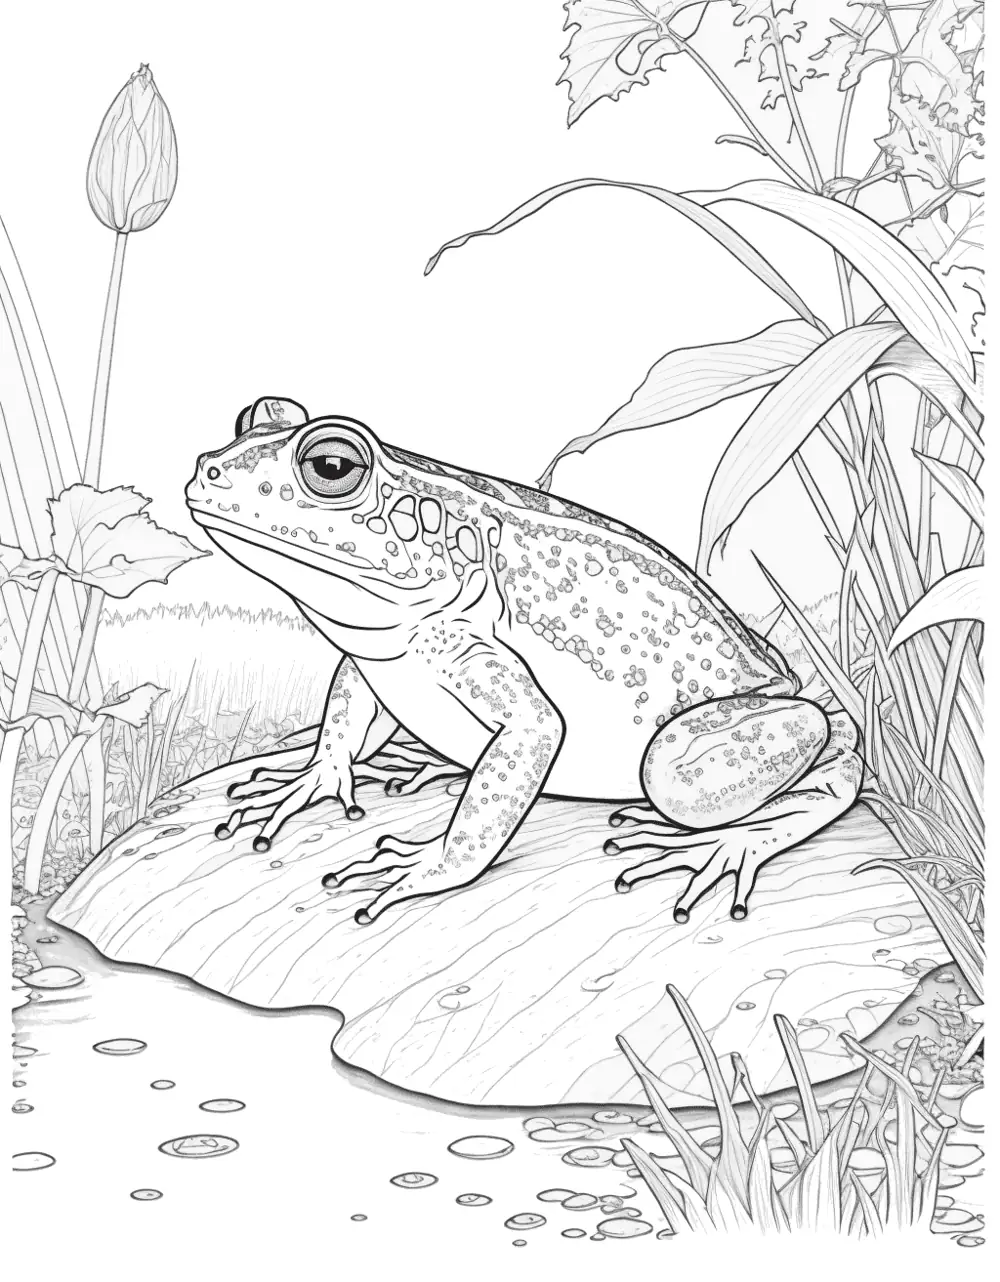 Realistic Frog in Nature Coloring Page - A realistically drawn frog in its natural habitat.